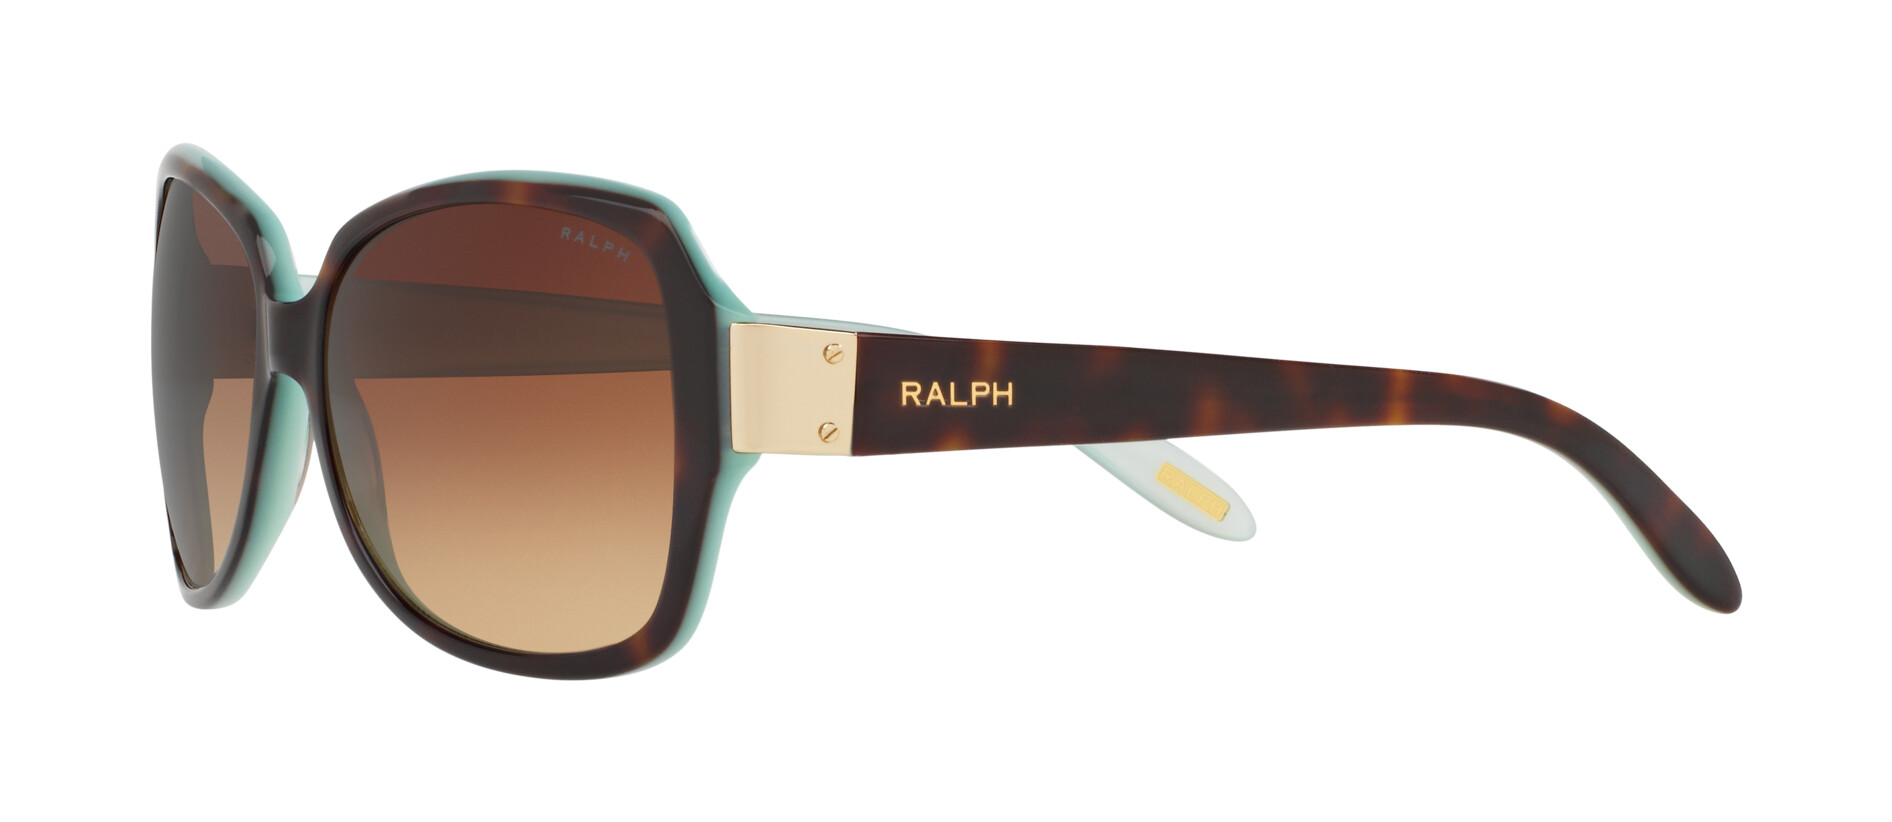 [products.image.angle_left02] Ralph Lauren 0RA5138 601/13 Sonnenbrille